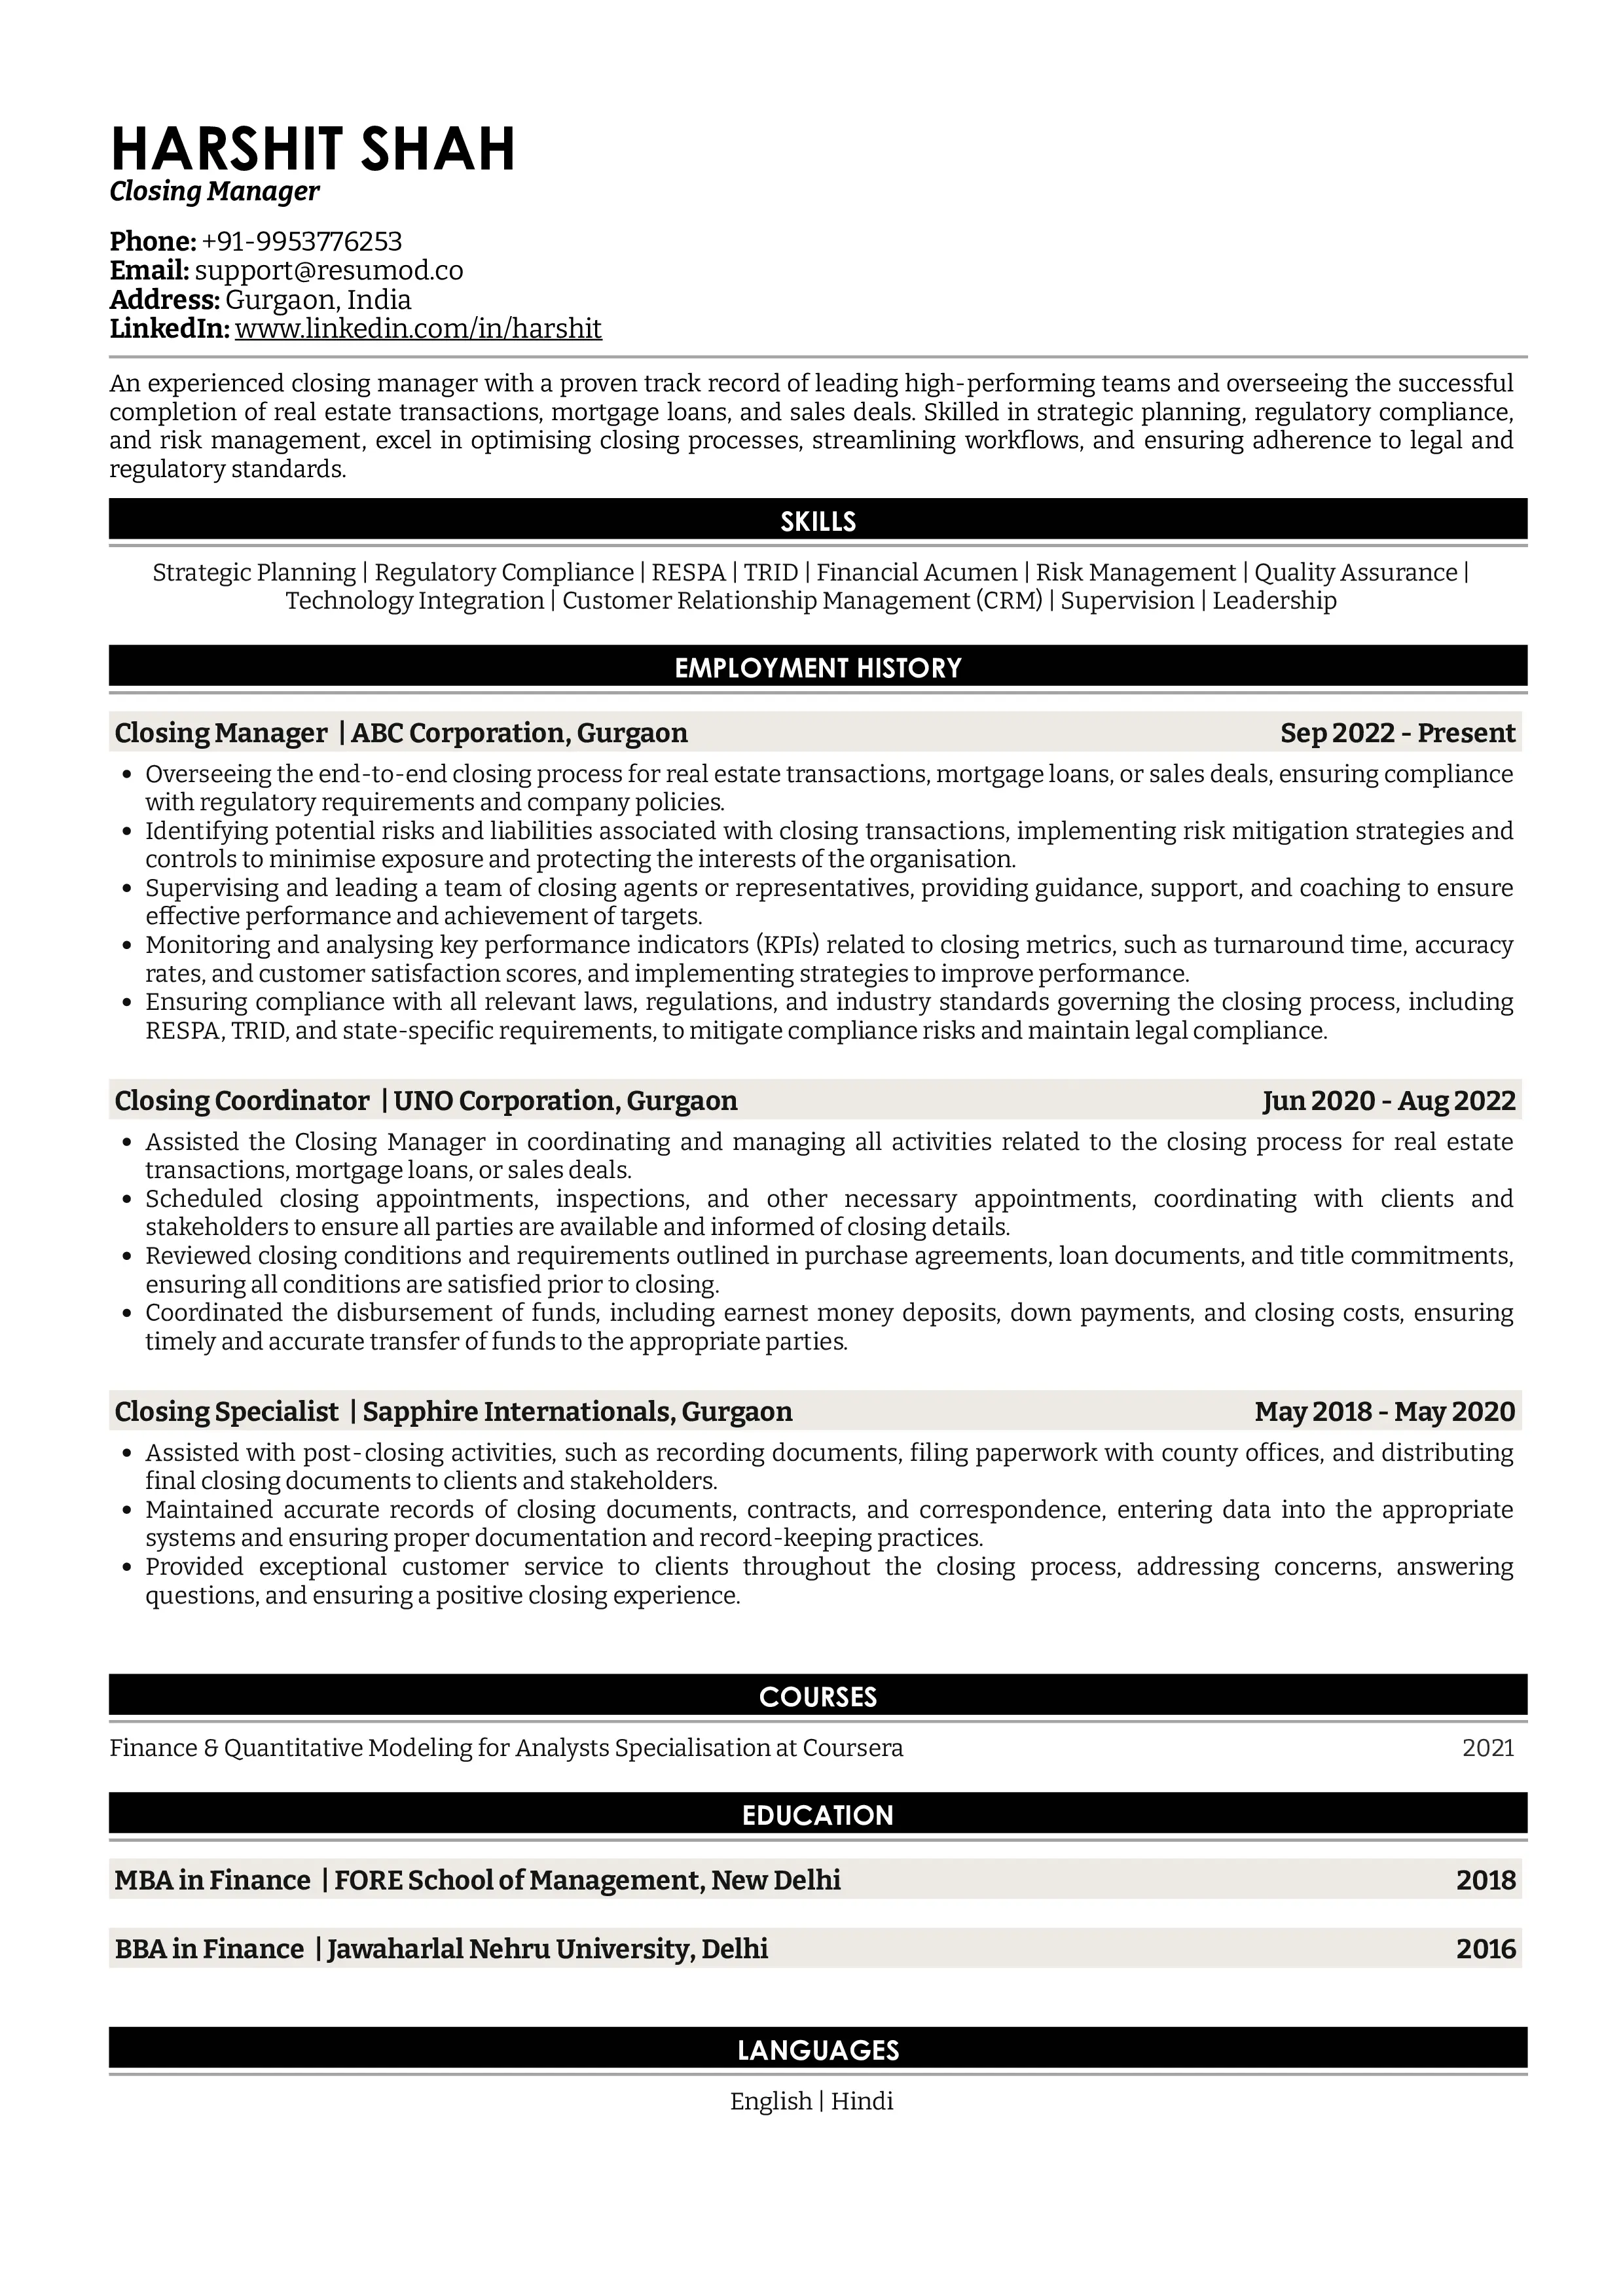 Sample Resume of Closing Manager | Free Resume Templates & Samples on Resumod.co